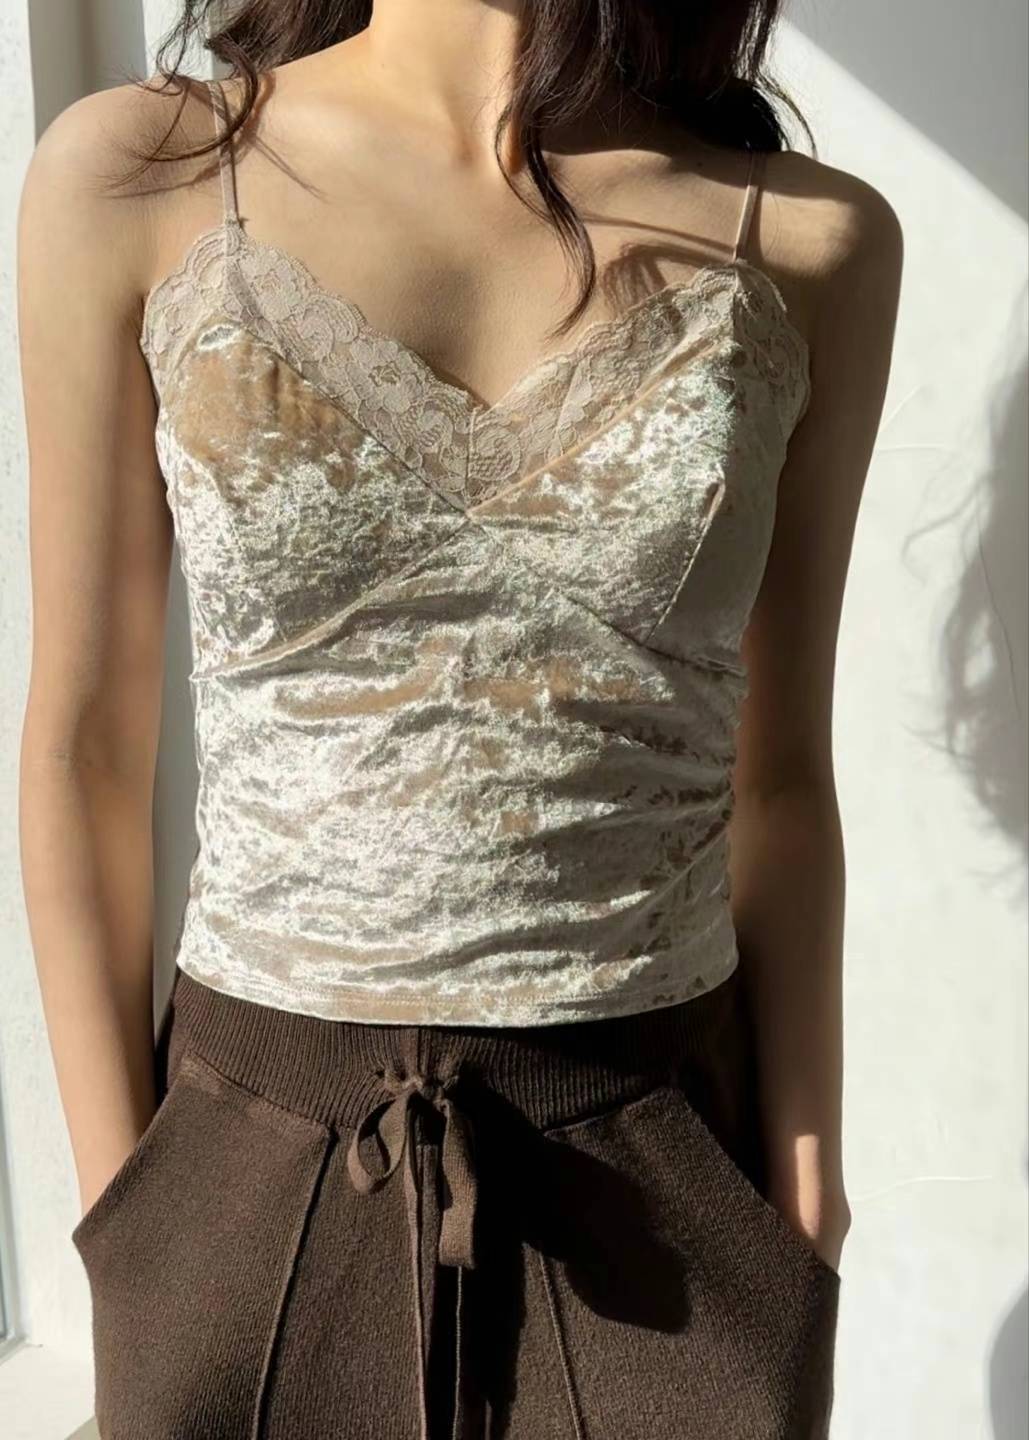 Blaise crushed velvet lace trimming camisole